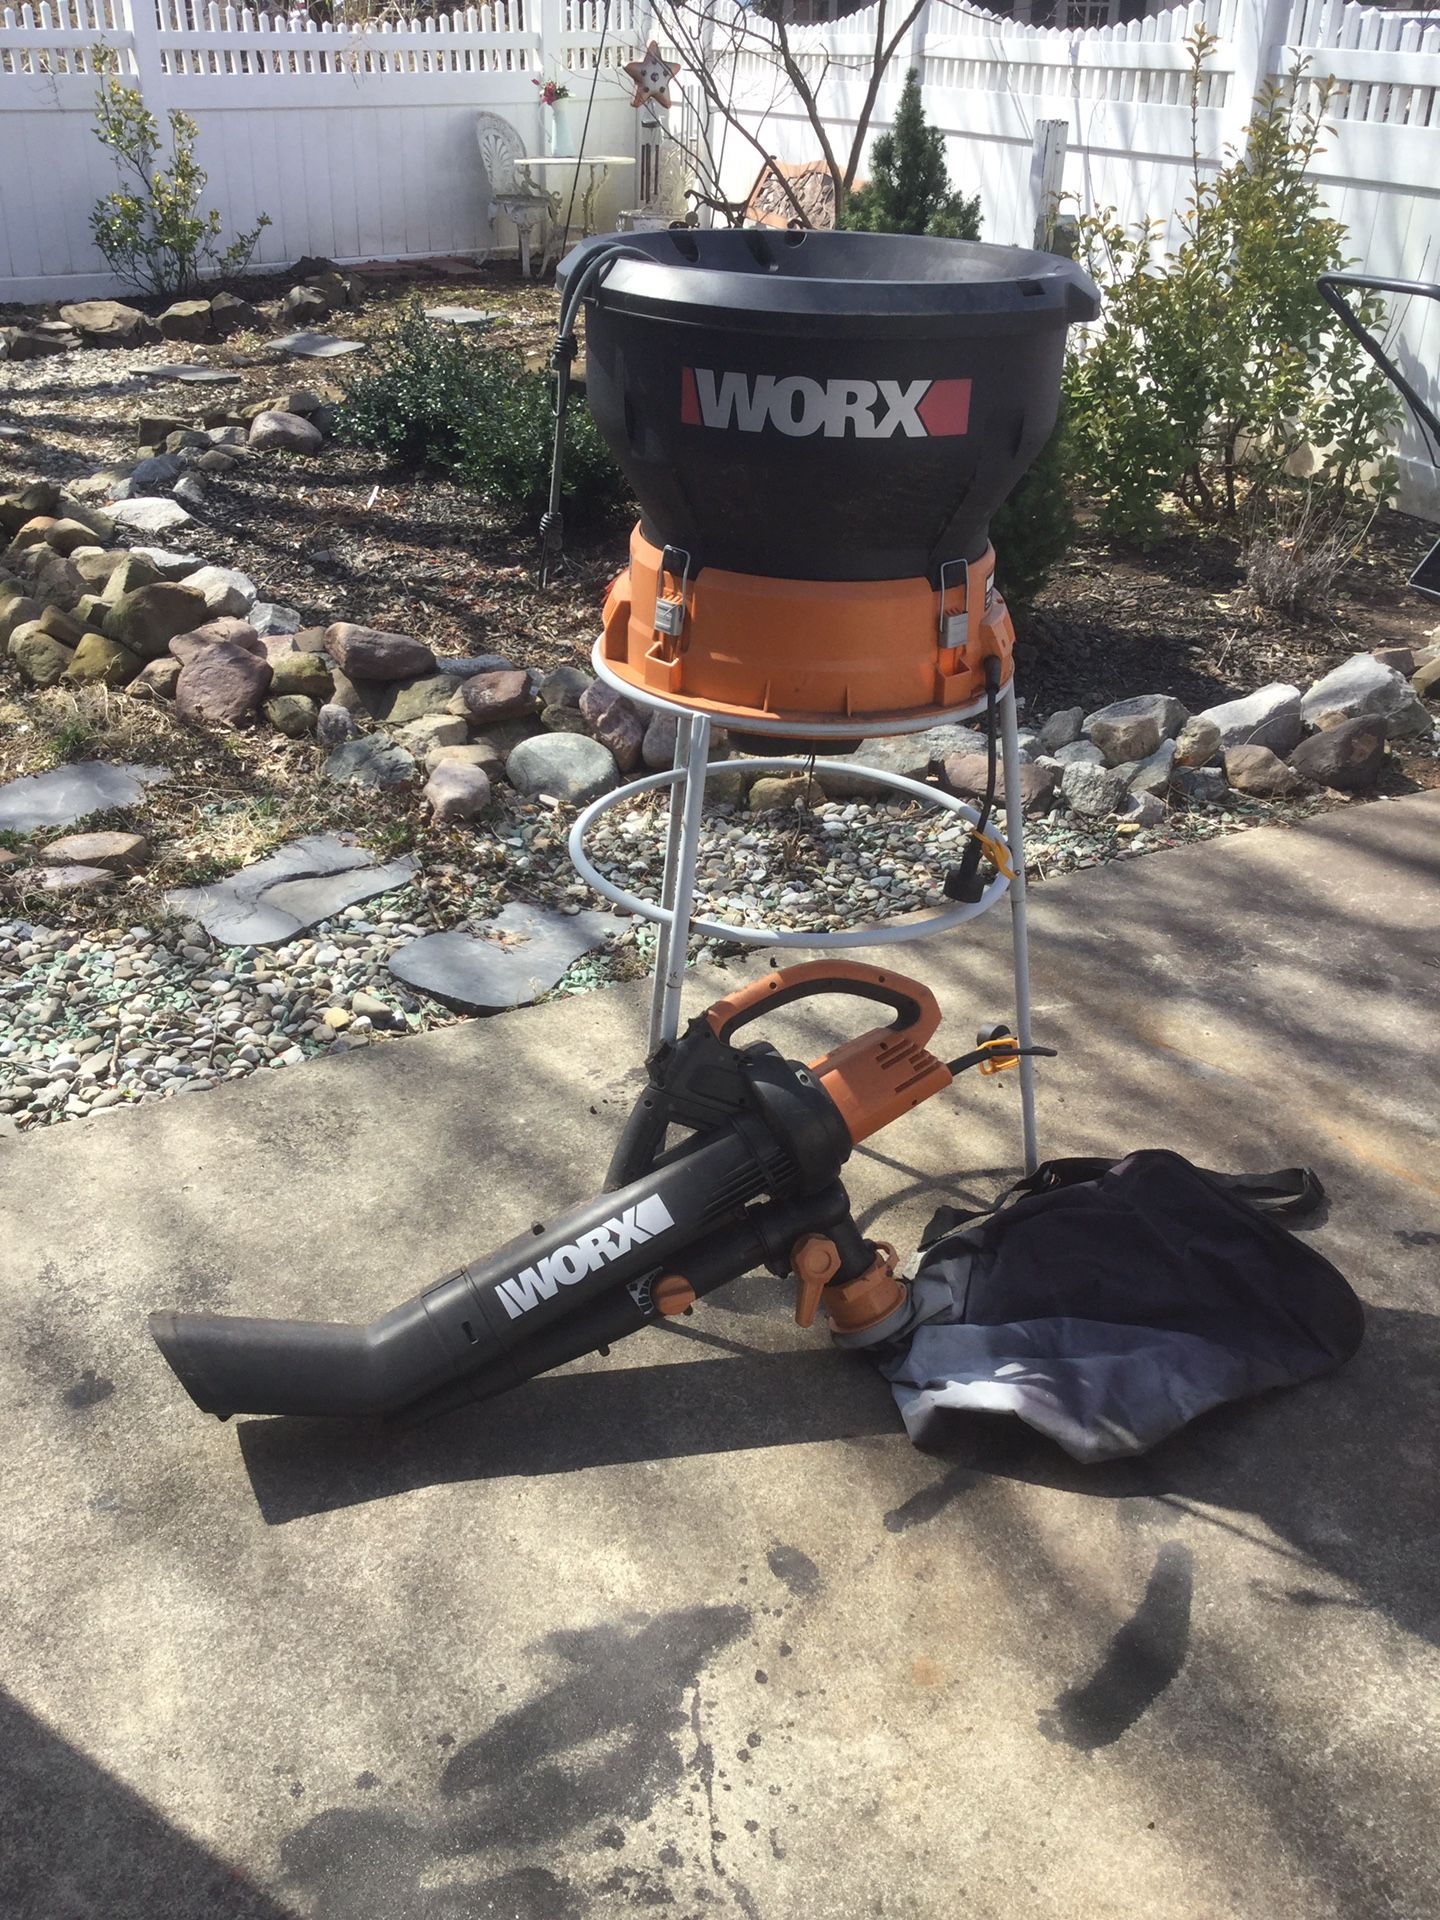 Worx electric leaf mulcher and worx electric leaf blower. Used once $75.00 for both